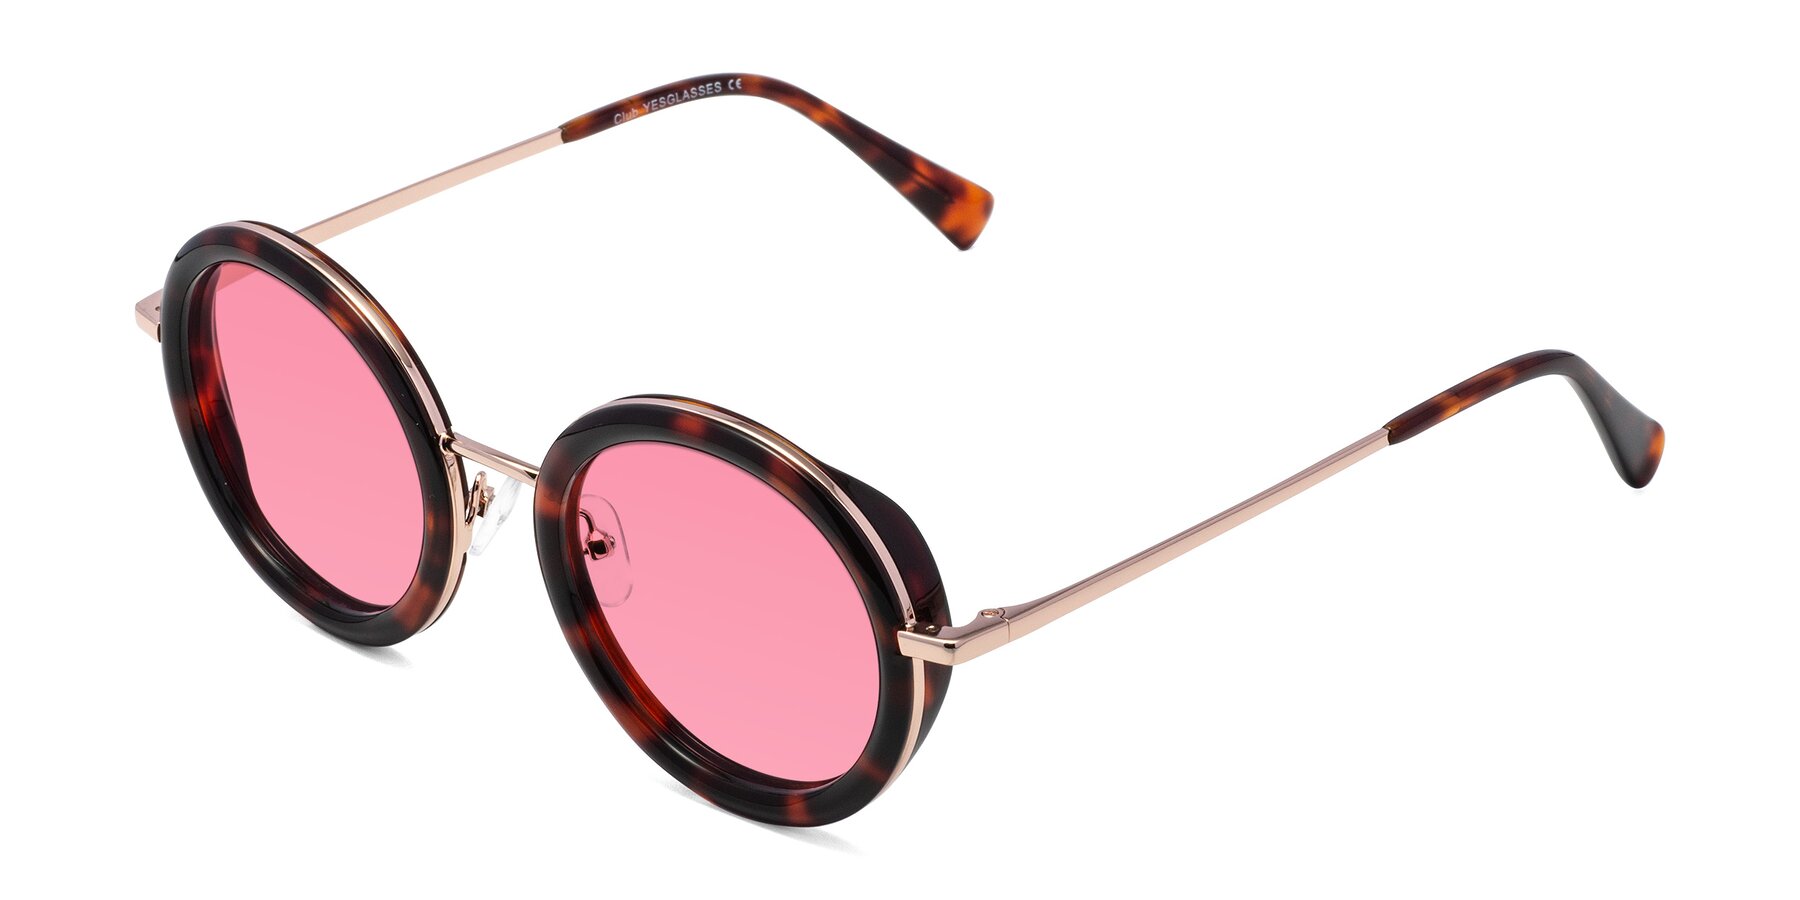 Angle of Club in Tortoise-Rose Gold with Pink Tinted Lenses